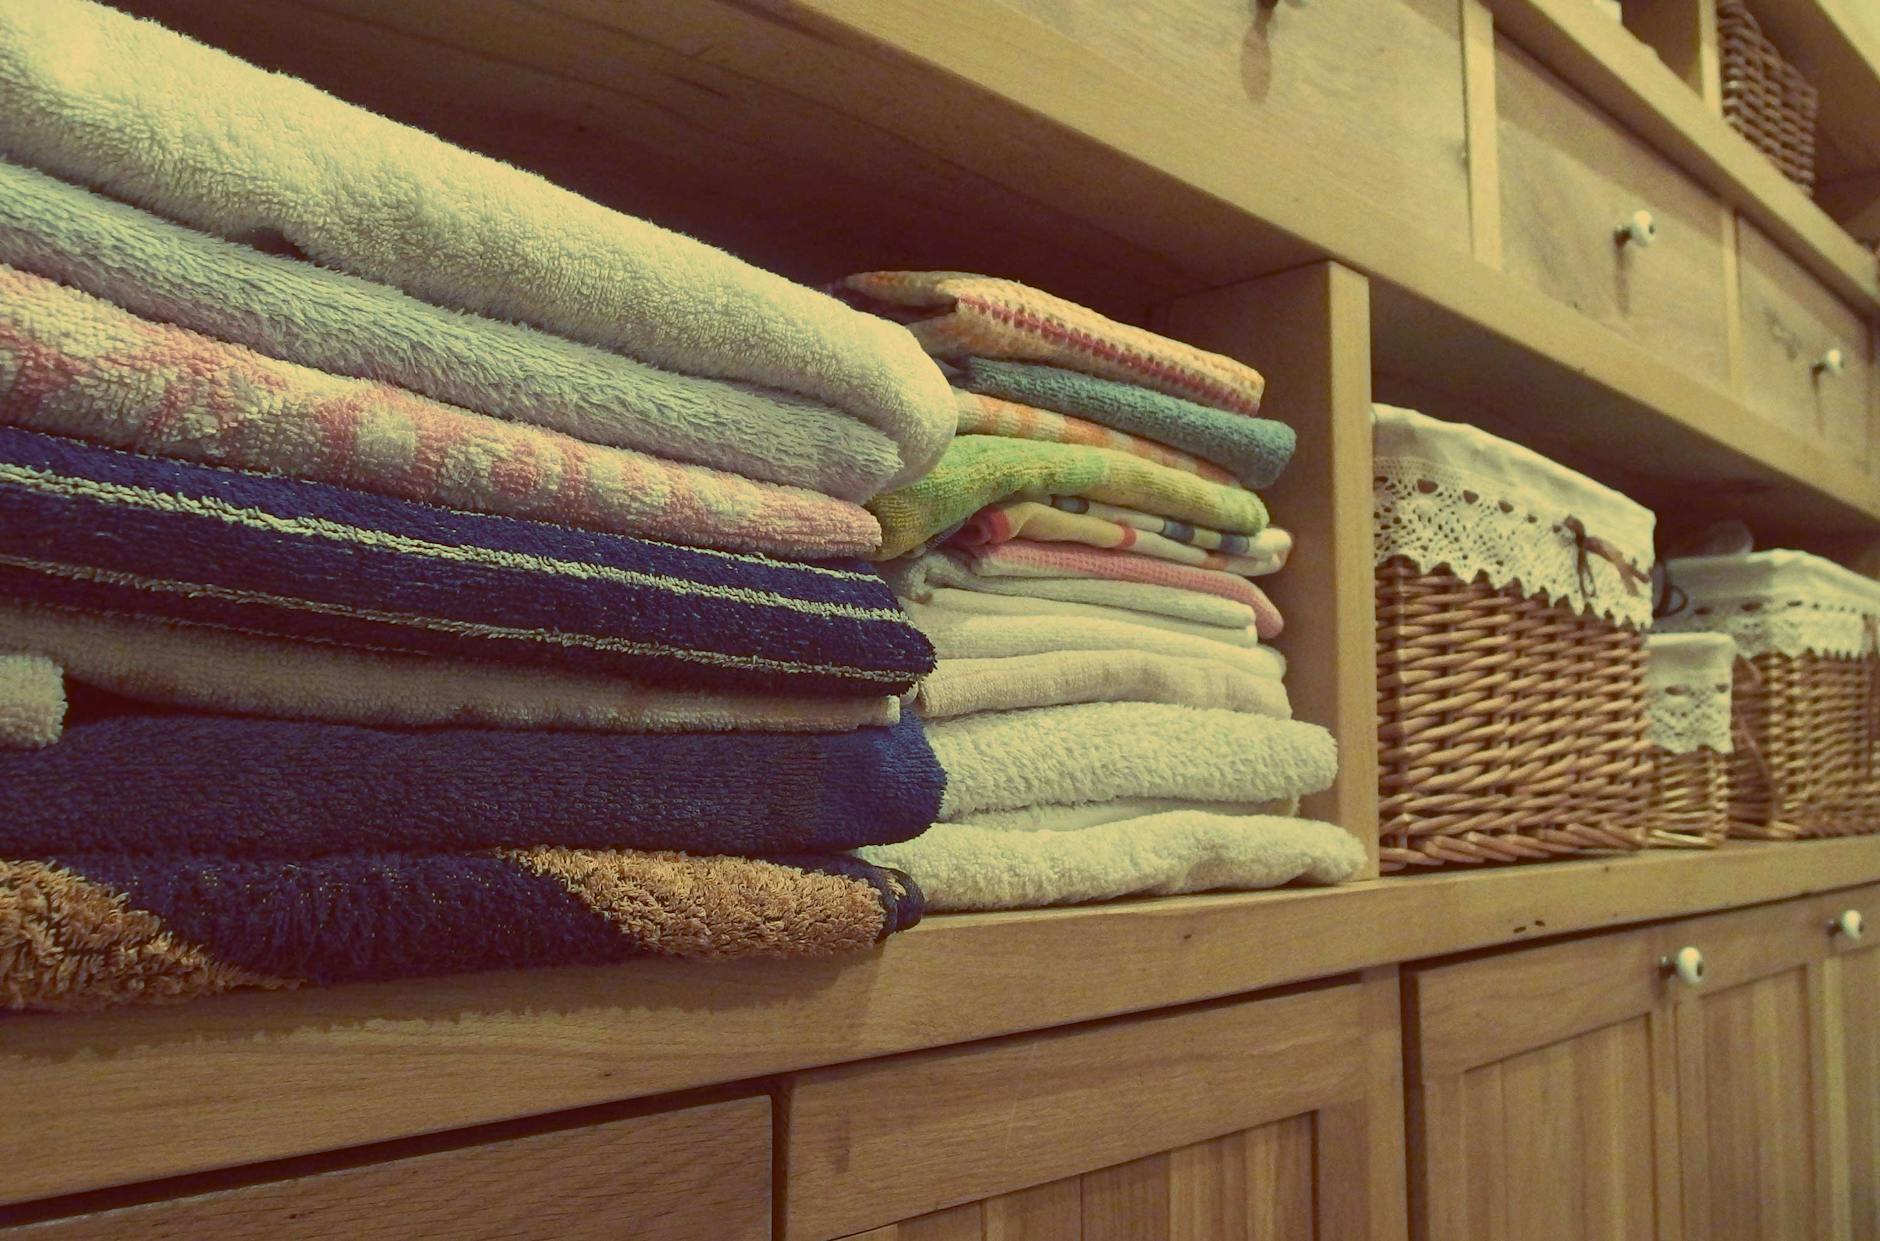 Shelves of linens neatly stacked.